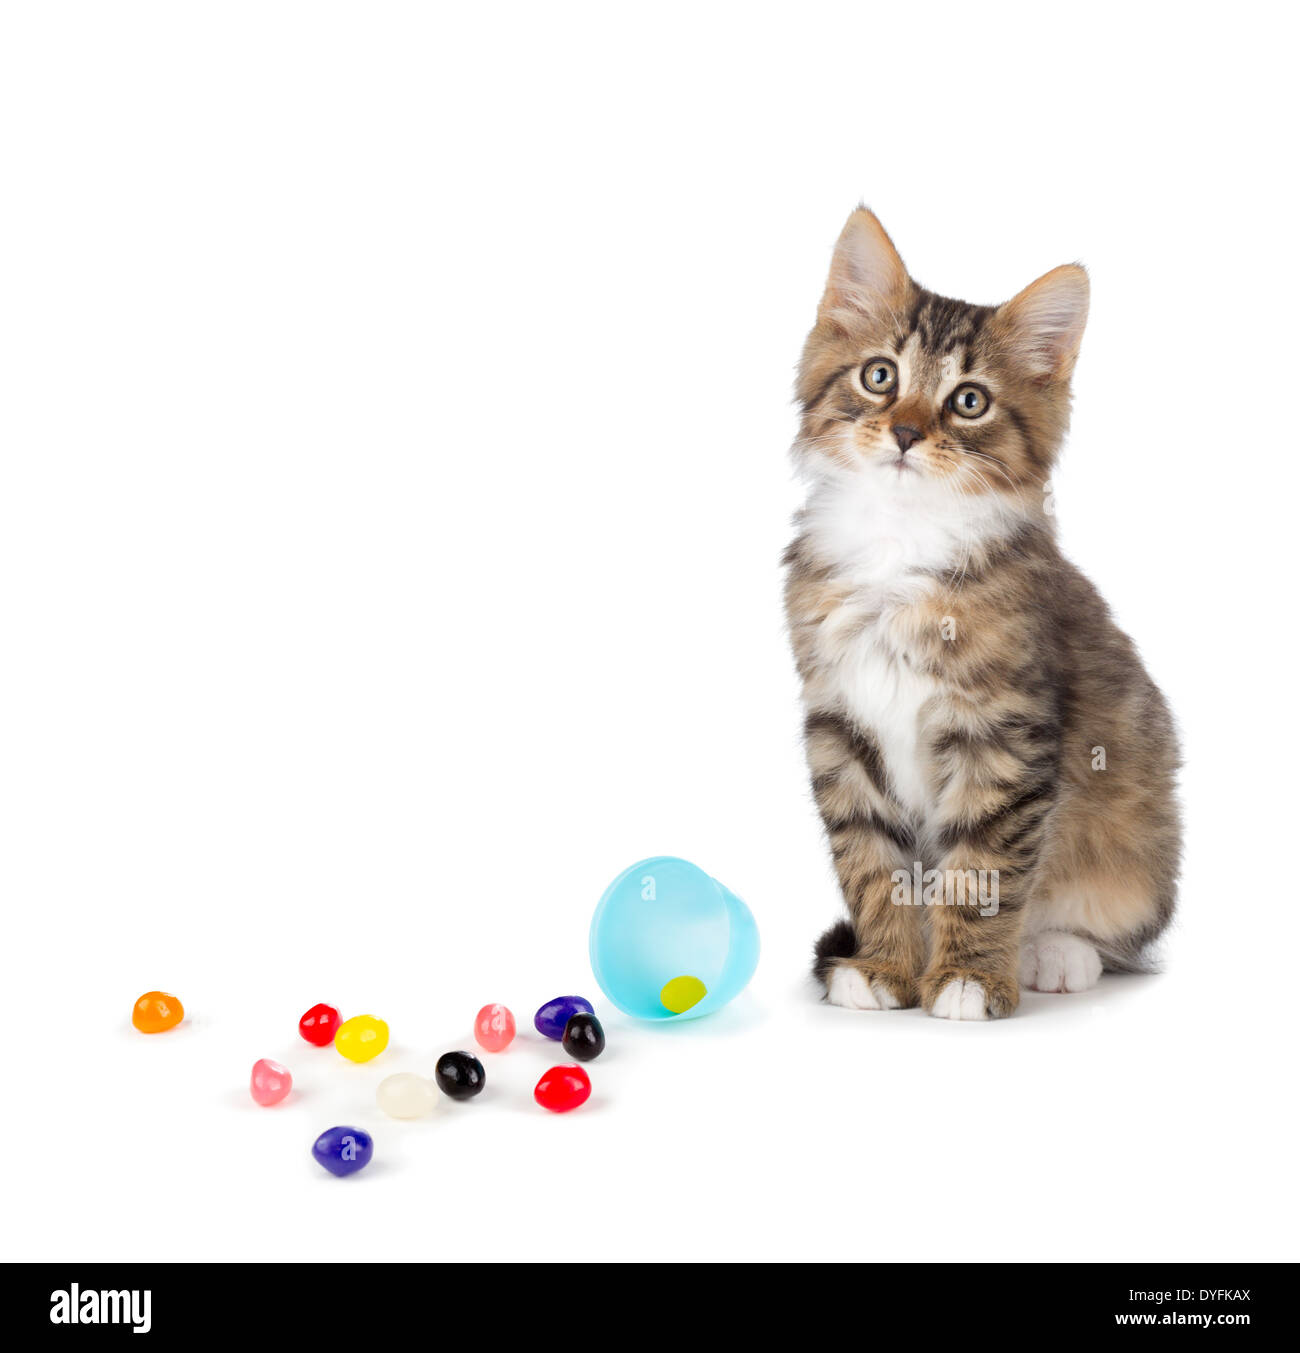 Cute tabby kitten sitting next to jelly beans spilled out of an Easter egg isolated on a white background. Stock Photo